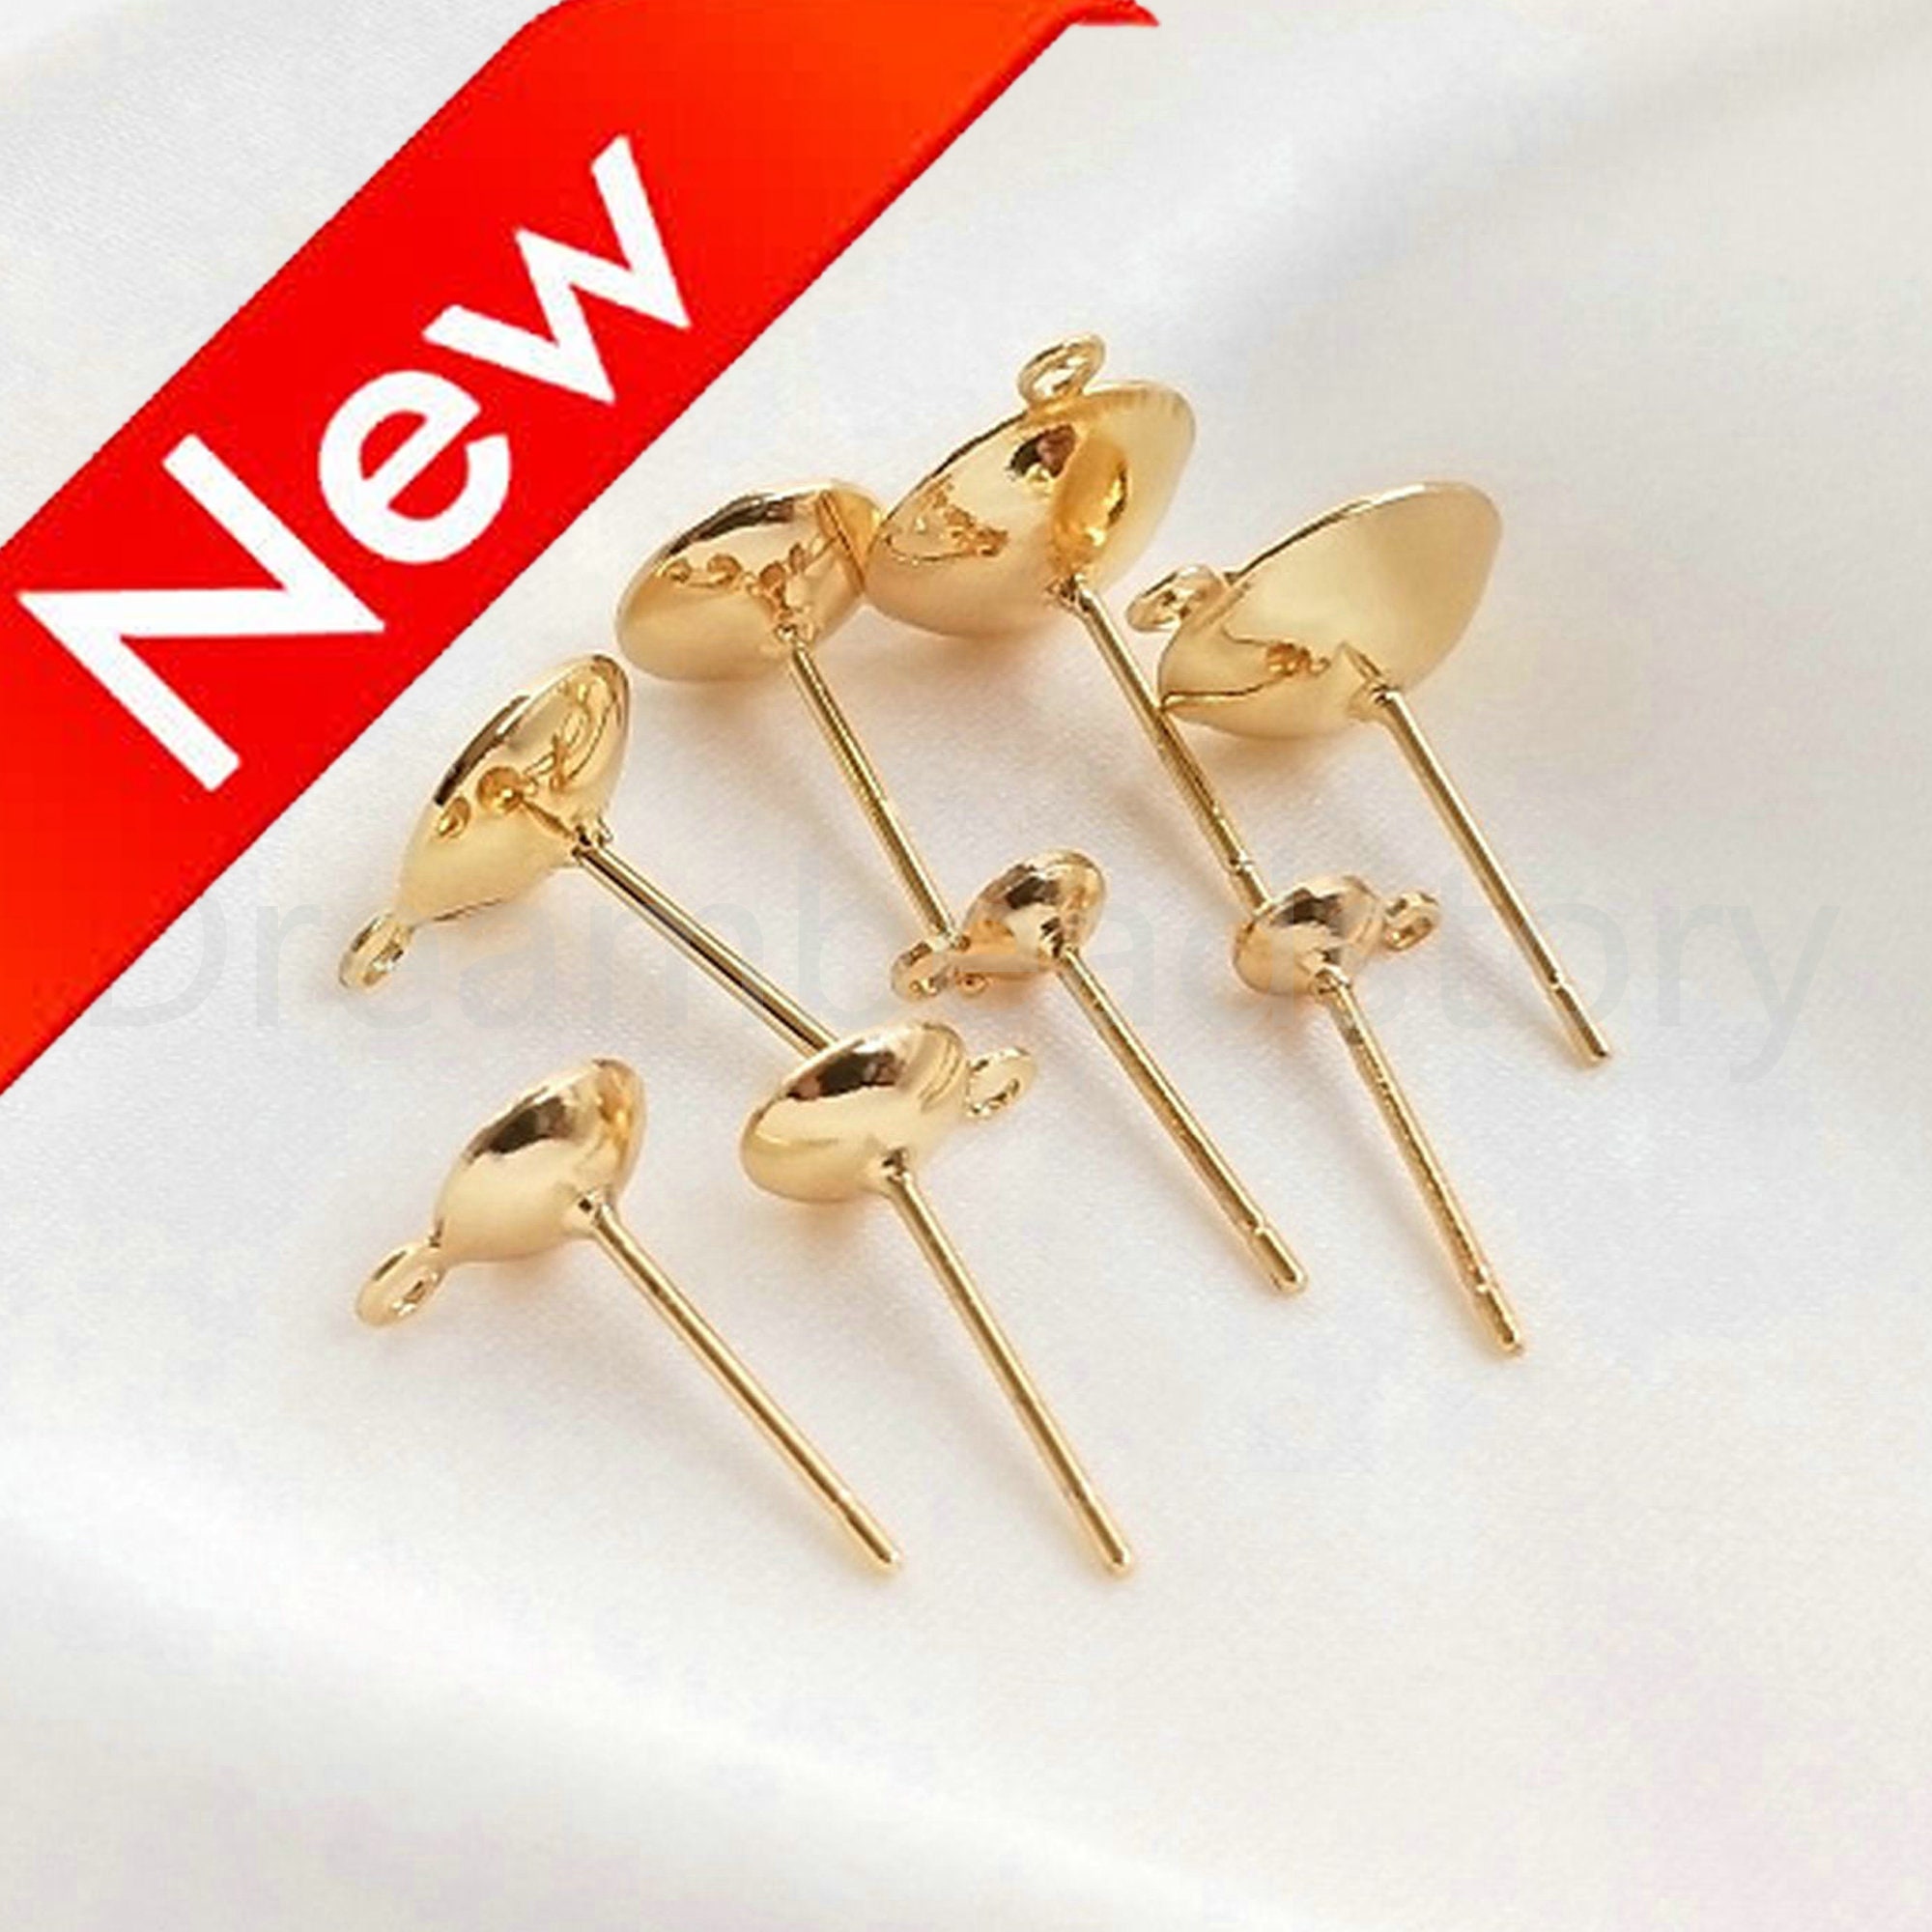 14K Gold Silicon Earring Backs Loop to Add Dangle 6mm for 0.5-0.85mm Posts  Replacement Ear Nuts Great to Hold Large Studs in Place 